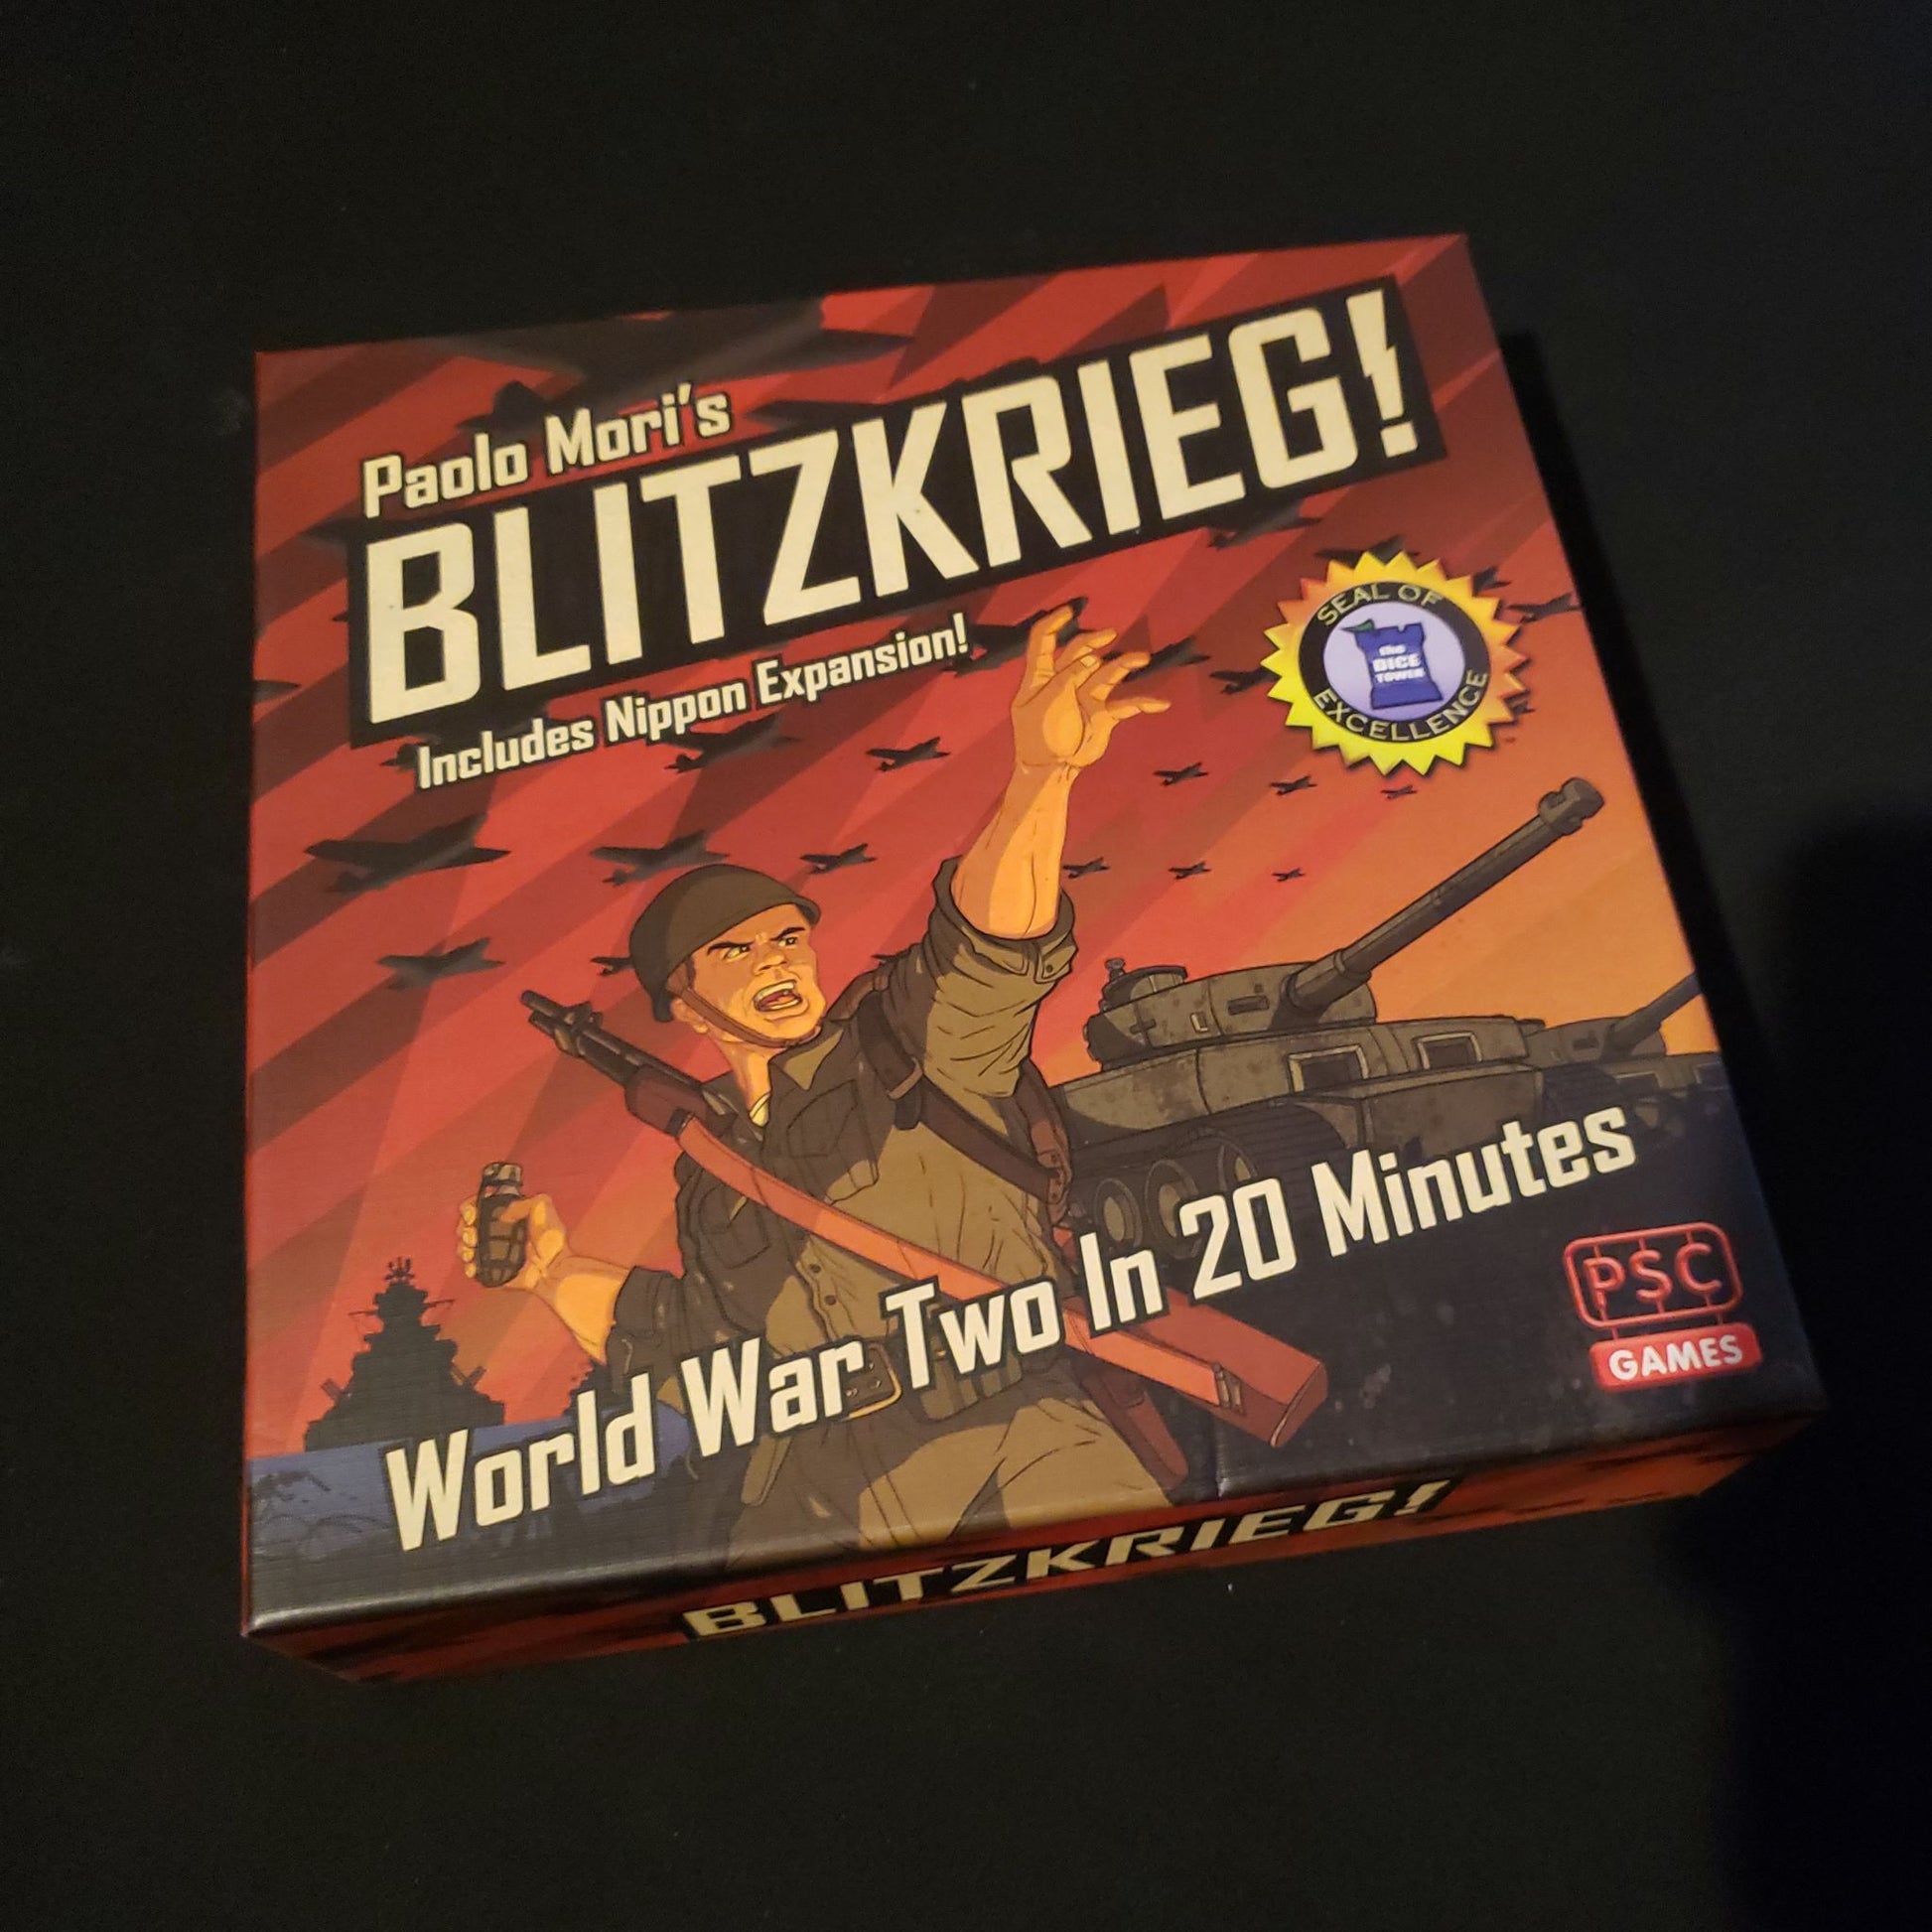 Blitzkrieg! board game - Front cover of box